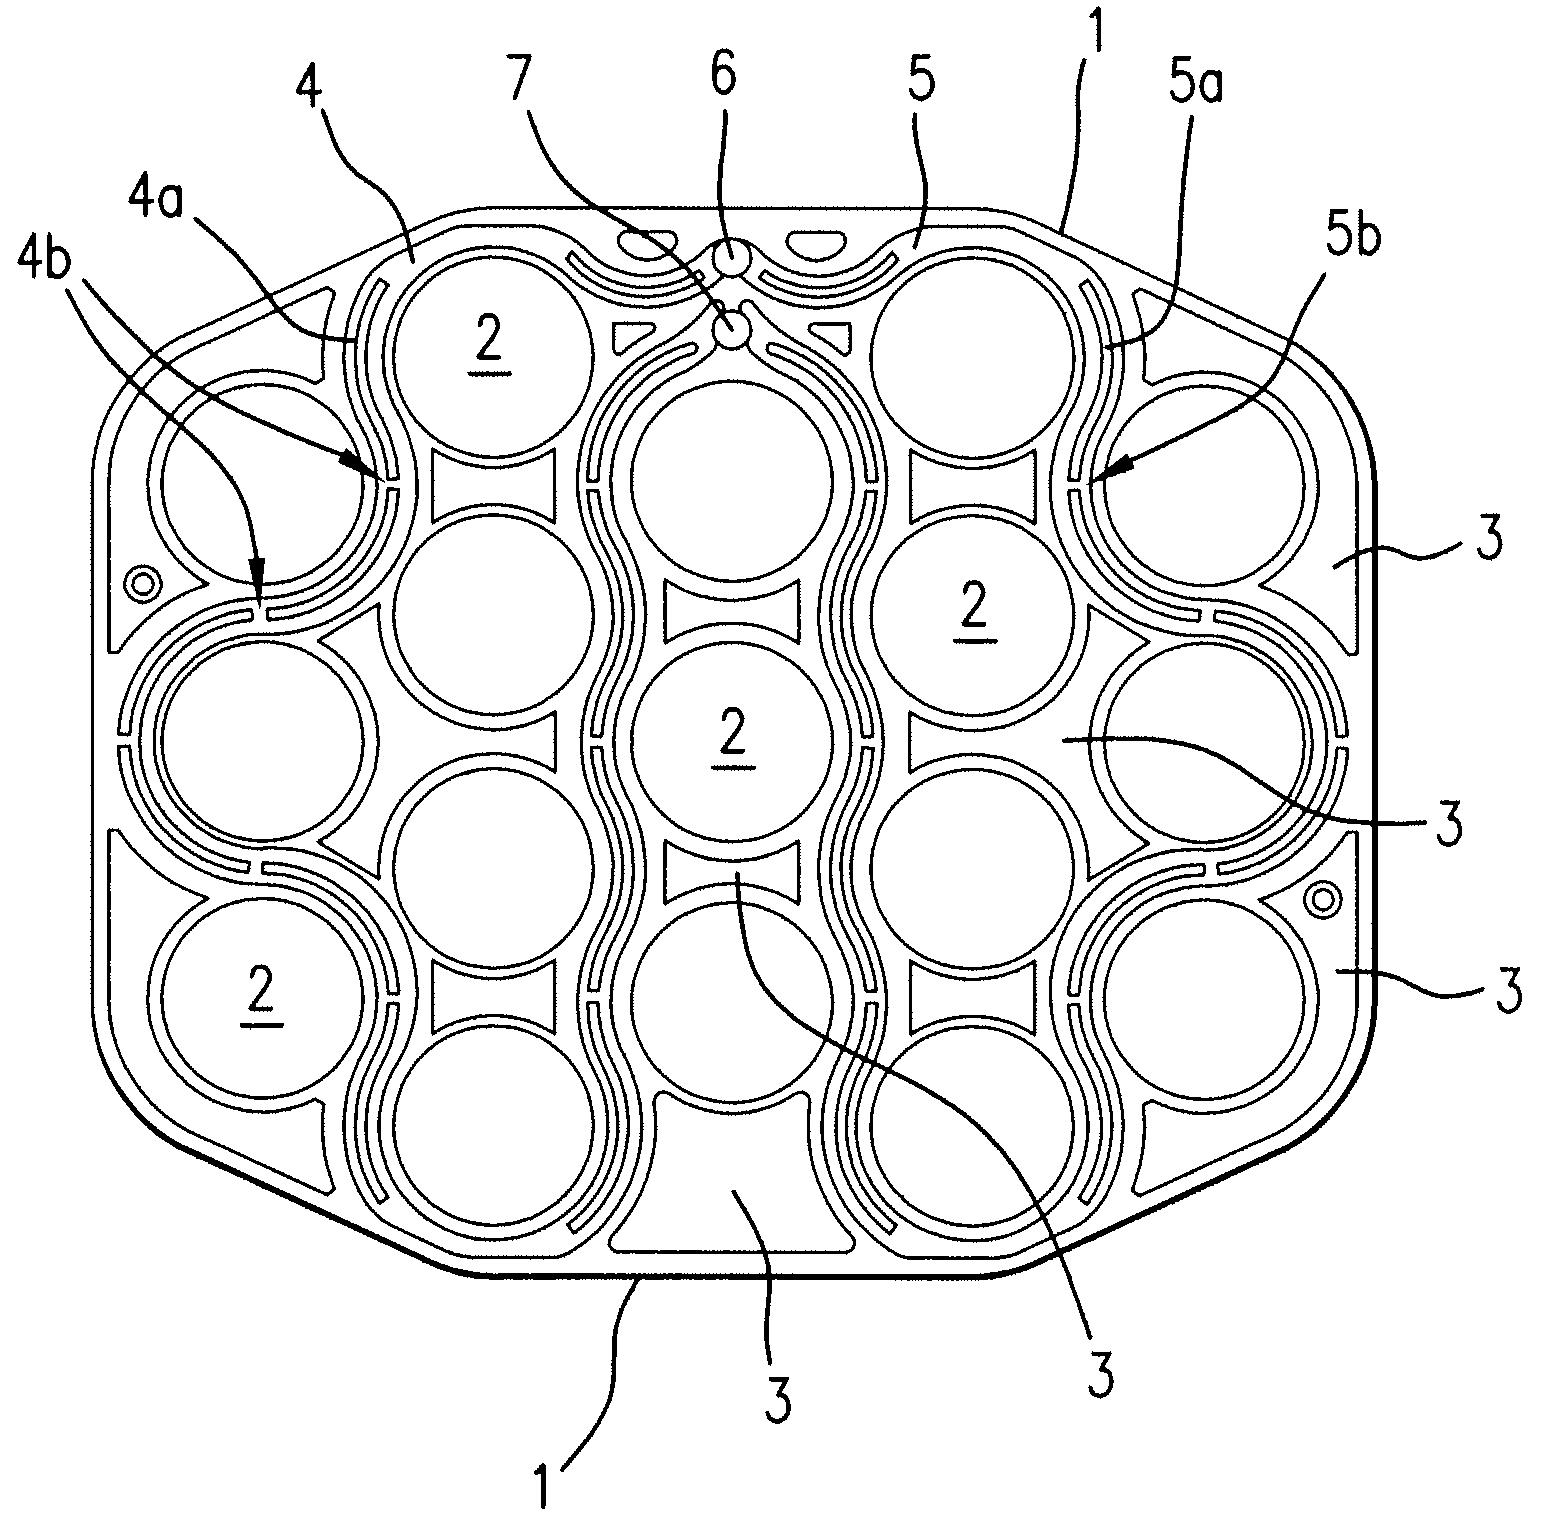 Apparatus for cooling of electrical elements